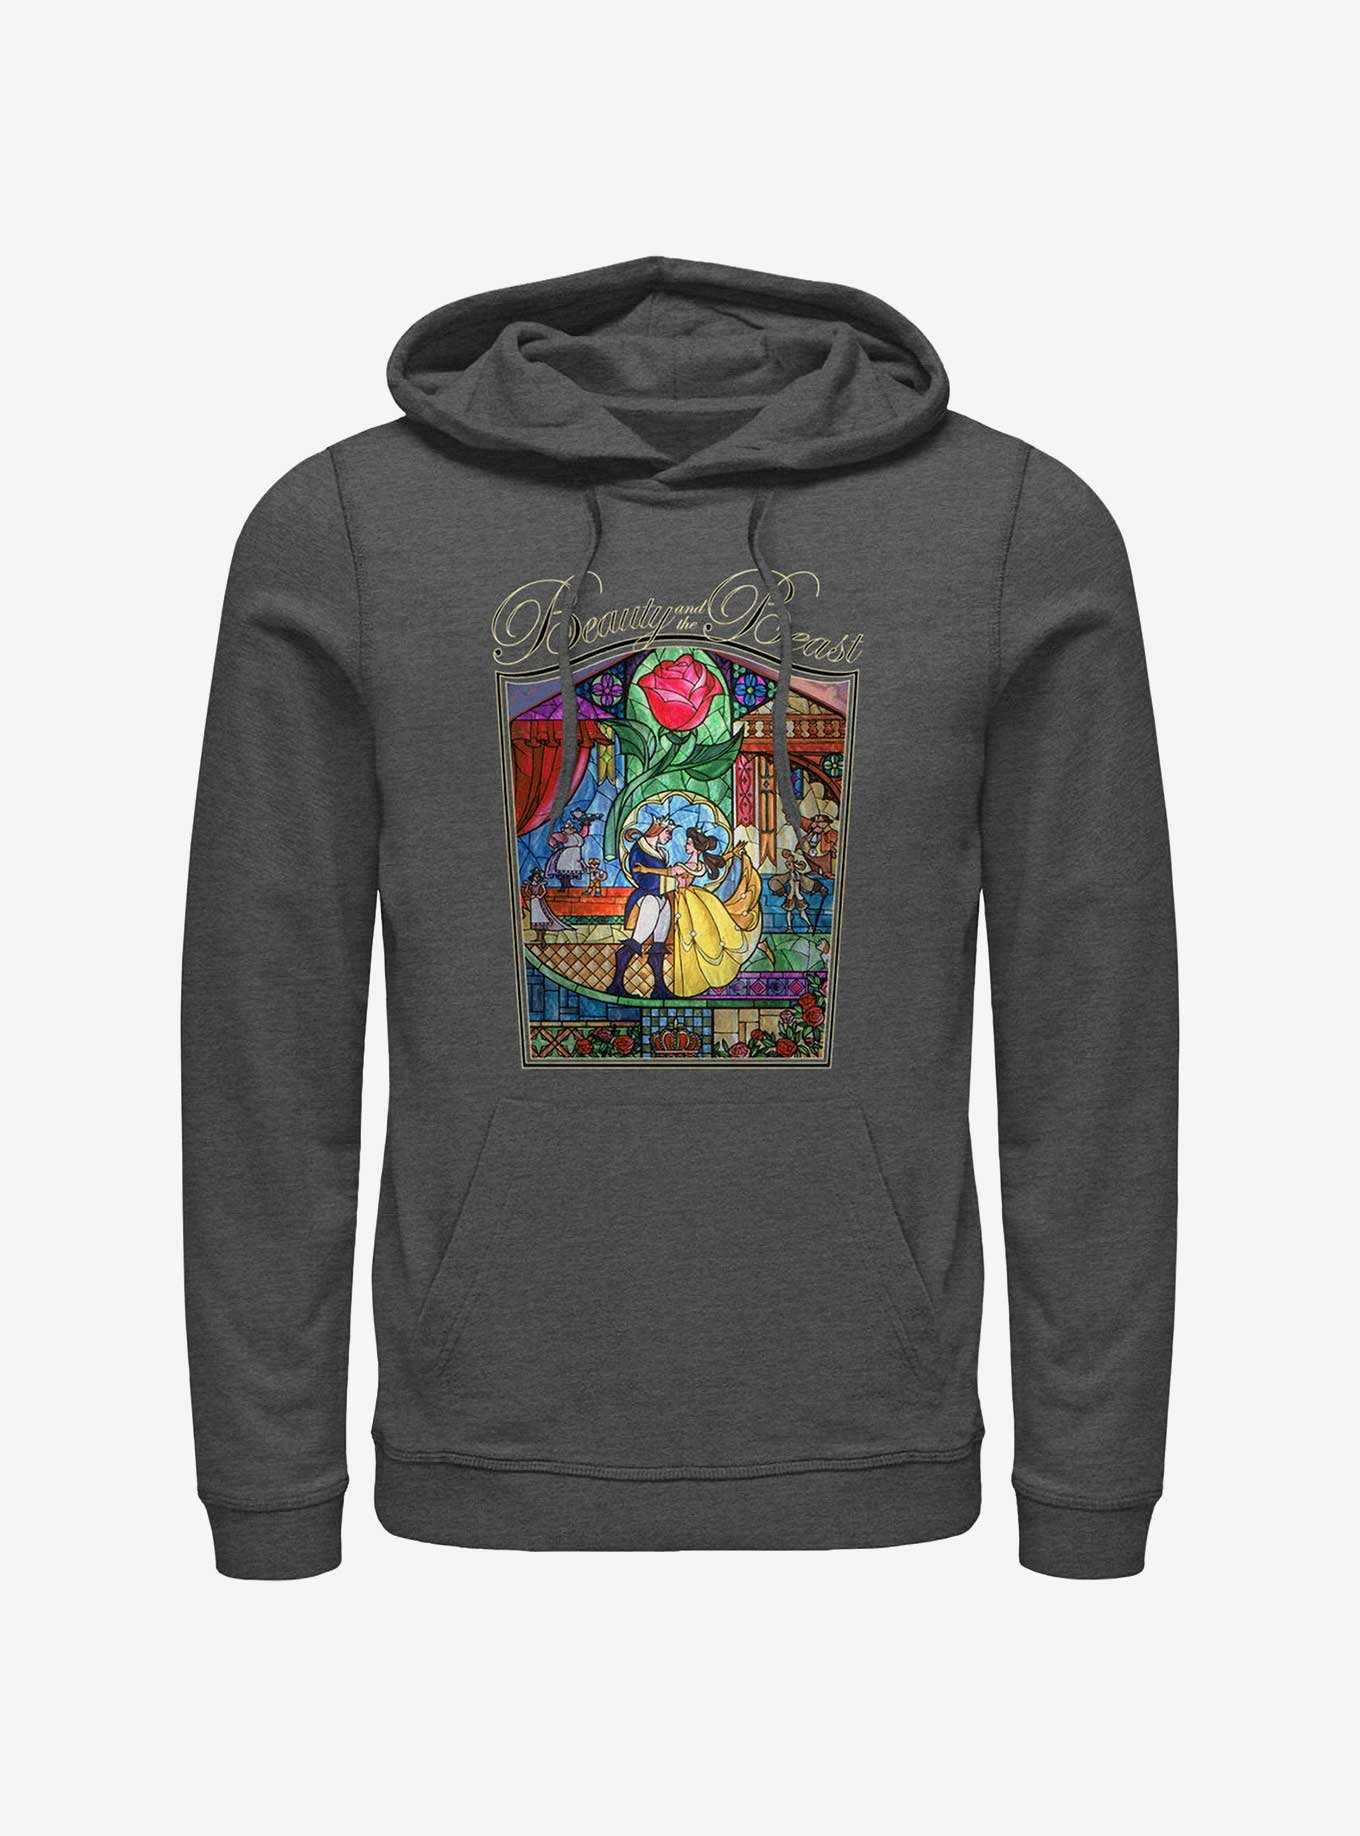 Disney Beauty and the Beast Stained Glass Story Hoodie, , hi-res